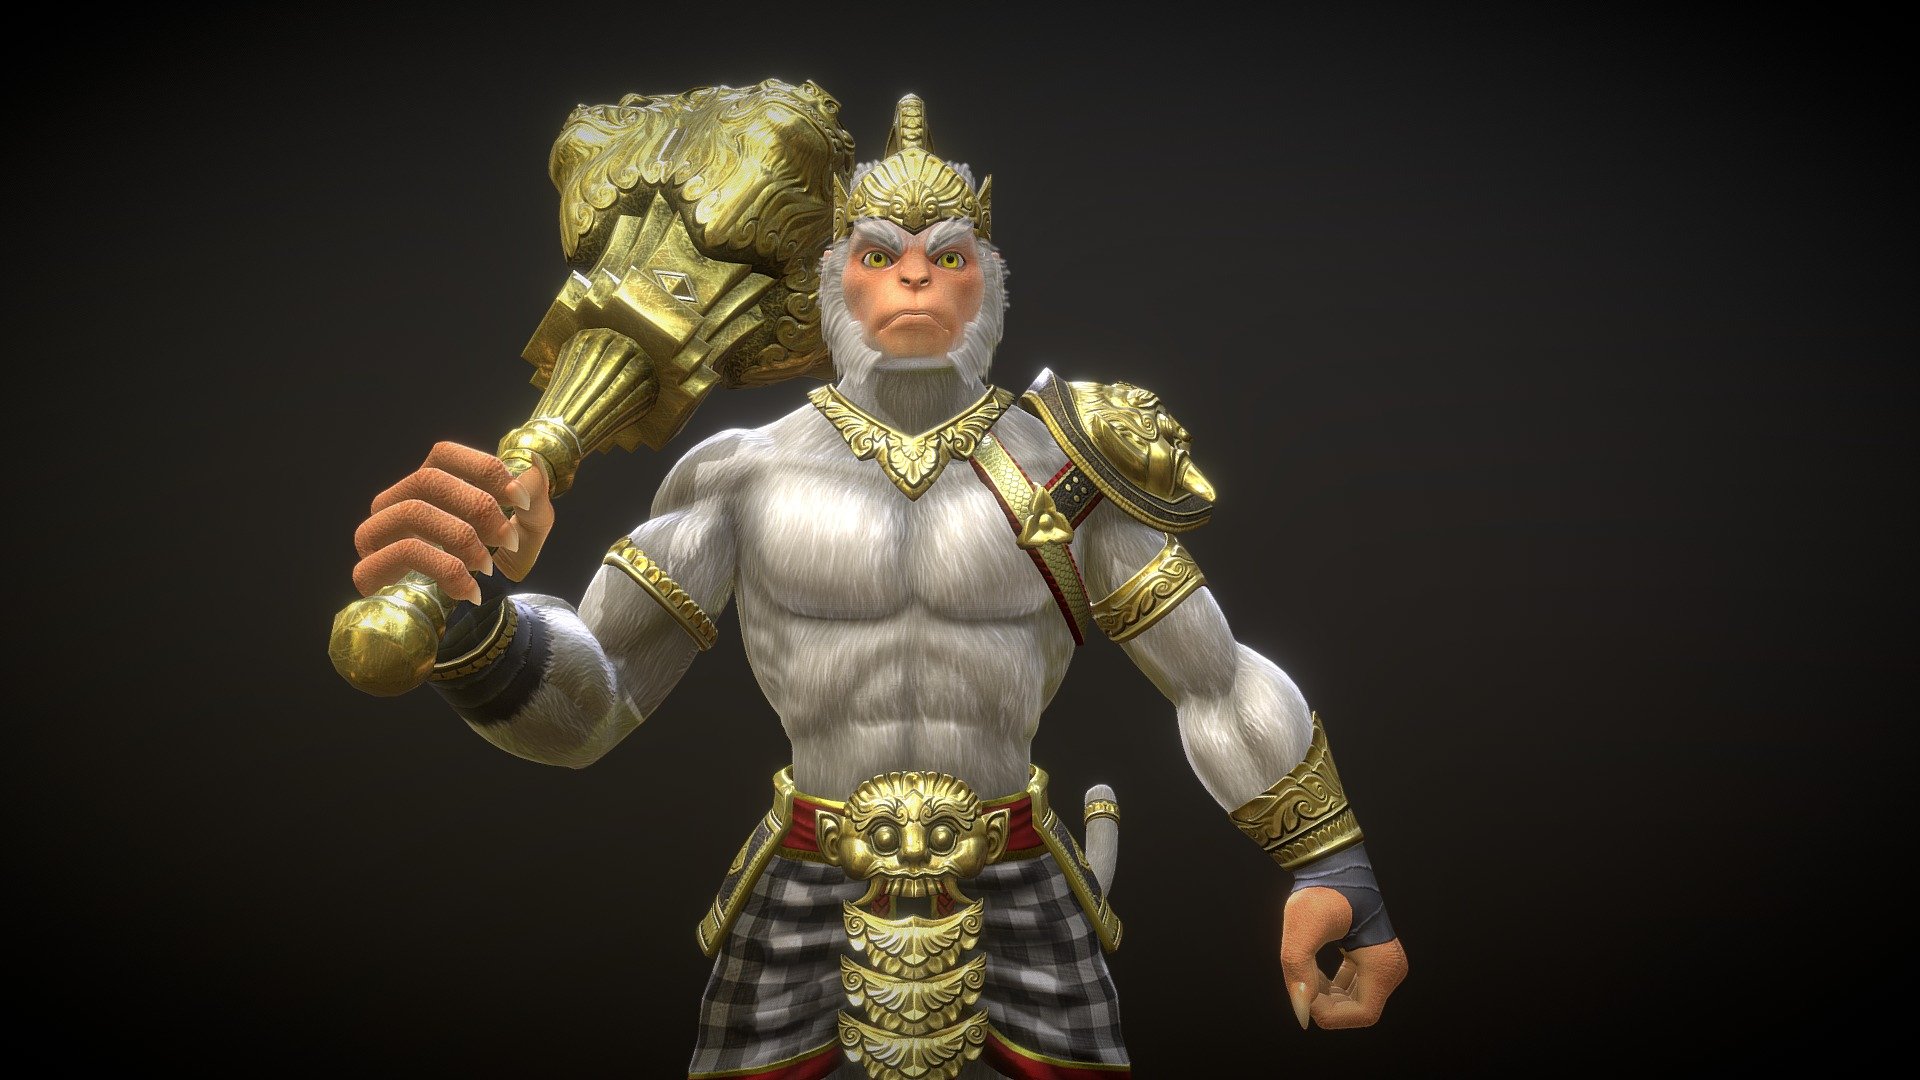 My rendition of the Hindu Great Monkey Warrior Hanuman. His ornaments are Balinese style, though I took a lot of freedom designing the whole look 3d model